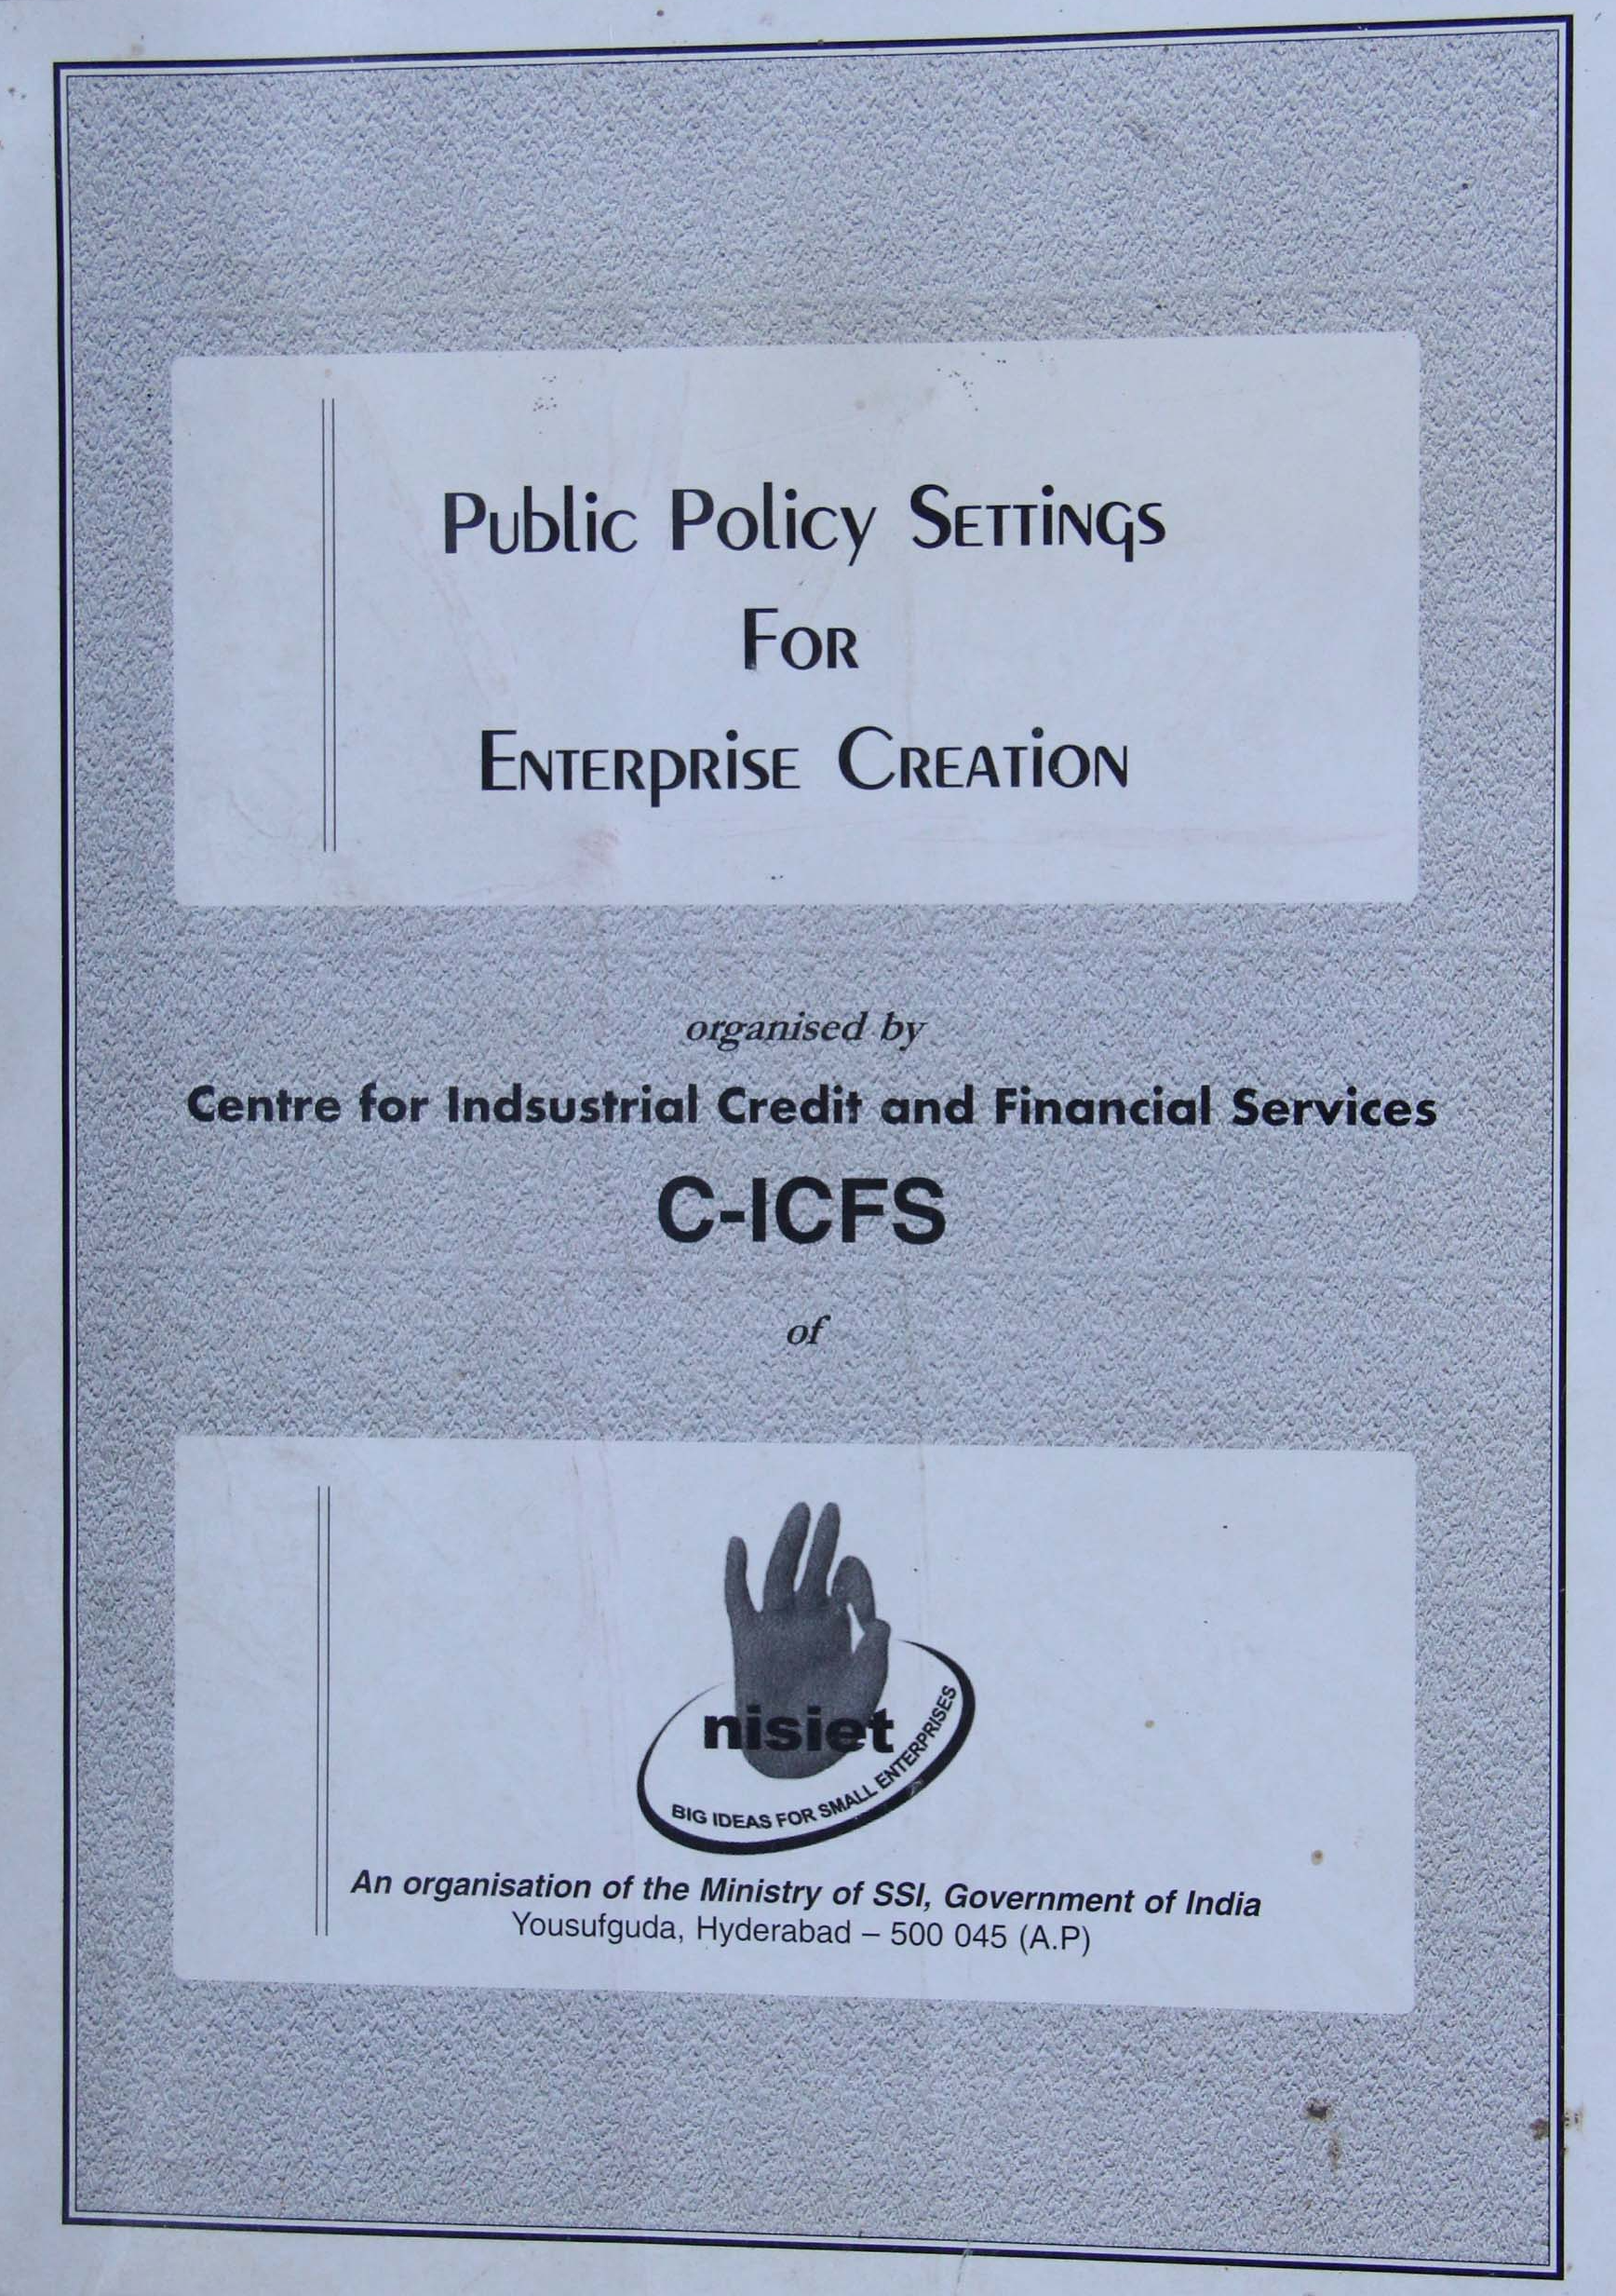 Public Policy Setting for Enterprise Creation